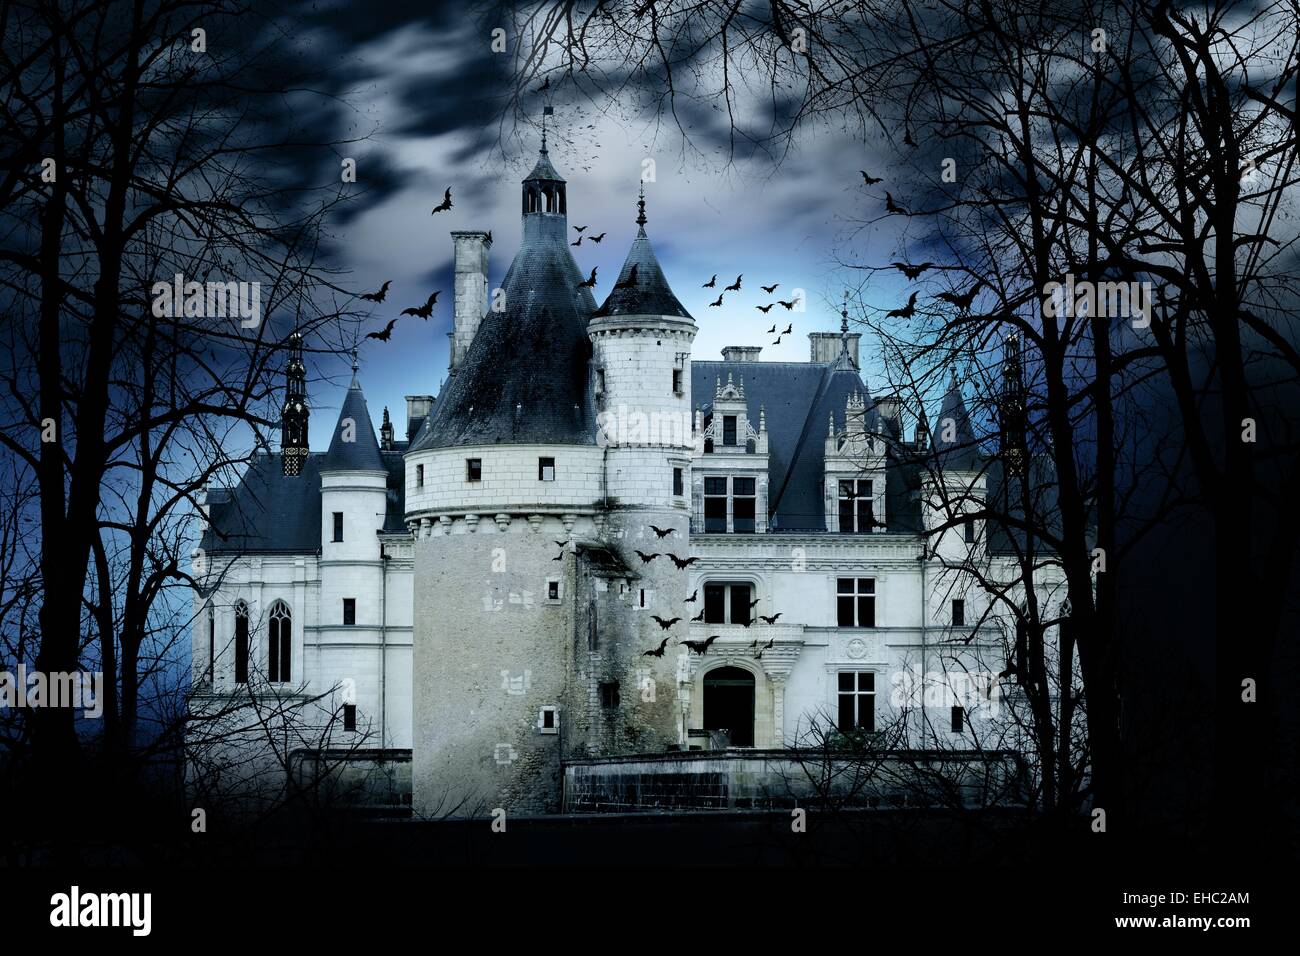 Haunted castle with dark scary horror atmosphere Stock Photo